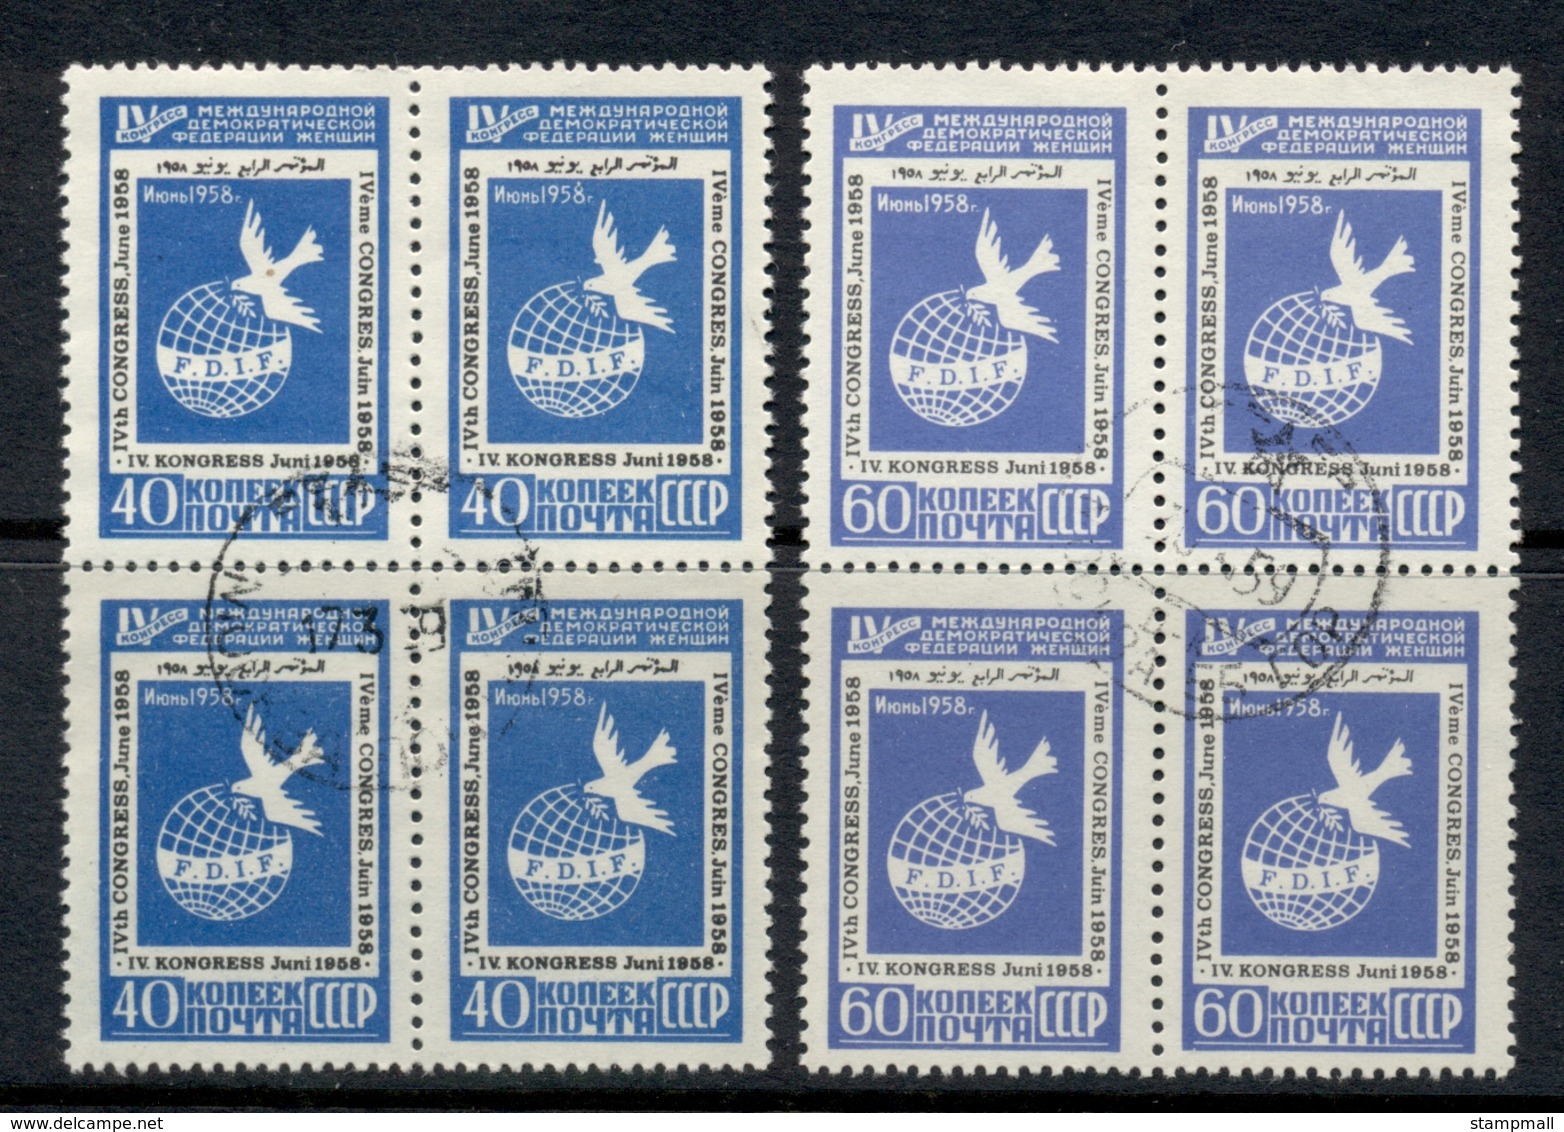 Russia 1958 Democratic Womens Federation Congress Blk4 CTO - Used Stamps